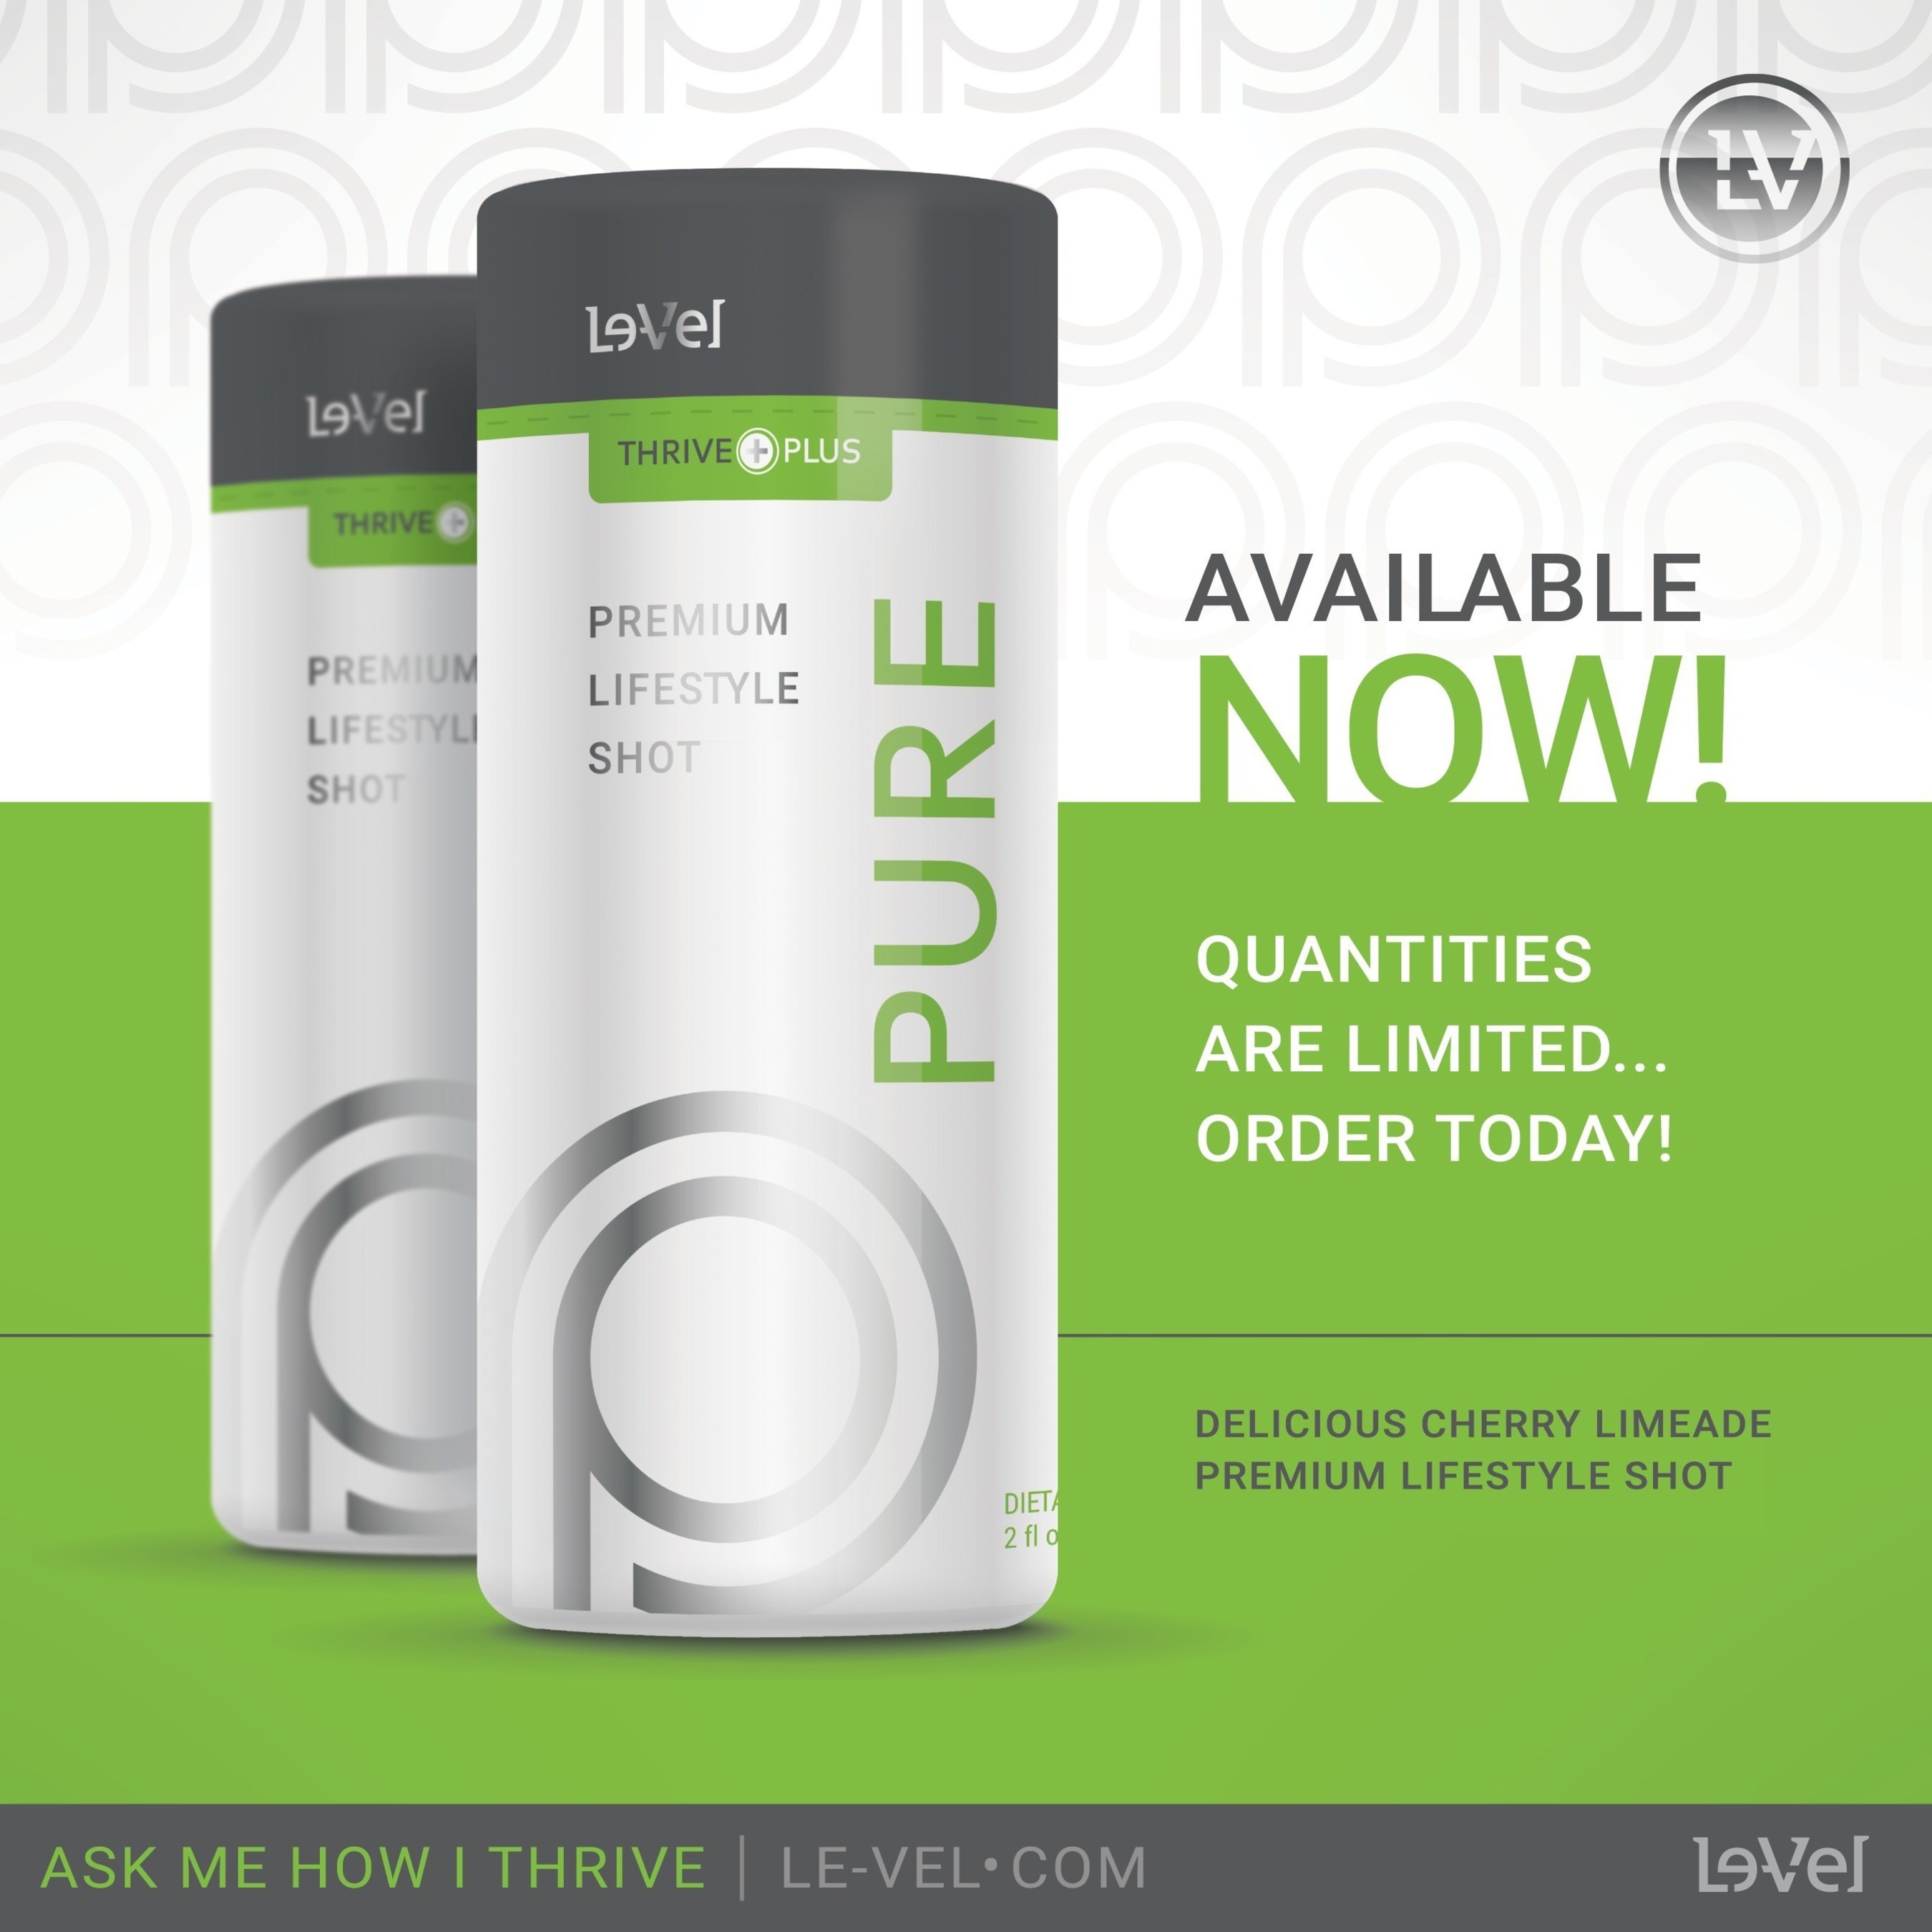 THRIVE Pure: a new premium supplement designed for fast-paced lifestyles